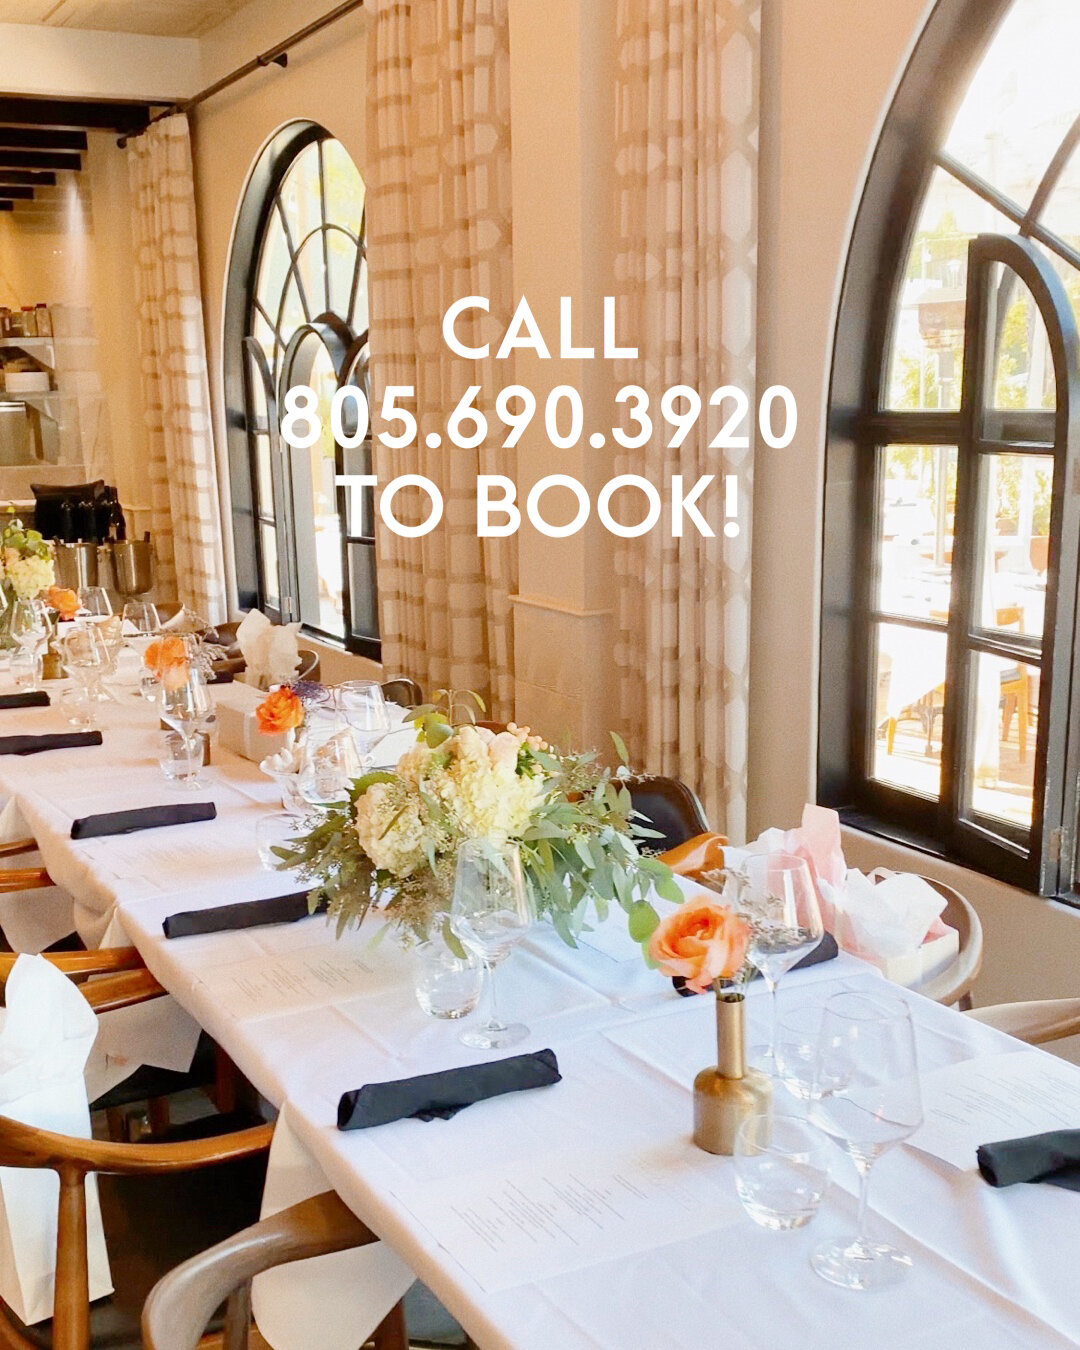 Enjoy an intimate dinner with your party &amp; a custom menu. Whether it be a birthday, work dinner, or any celebration&hellip; Call us to book! ✨ ​​​​​​​​
​​​​​​​​
#coastandolive #montecitoinn #montecito